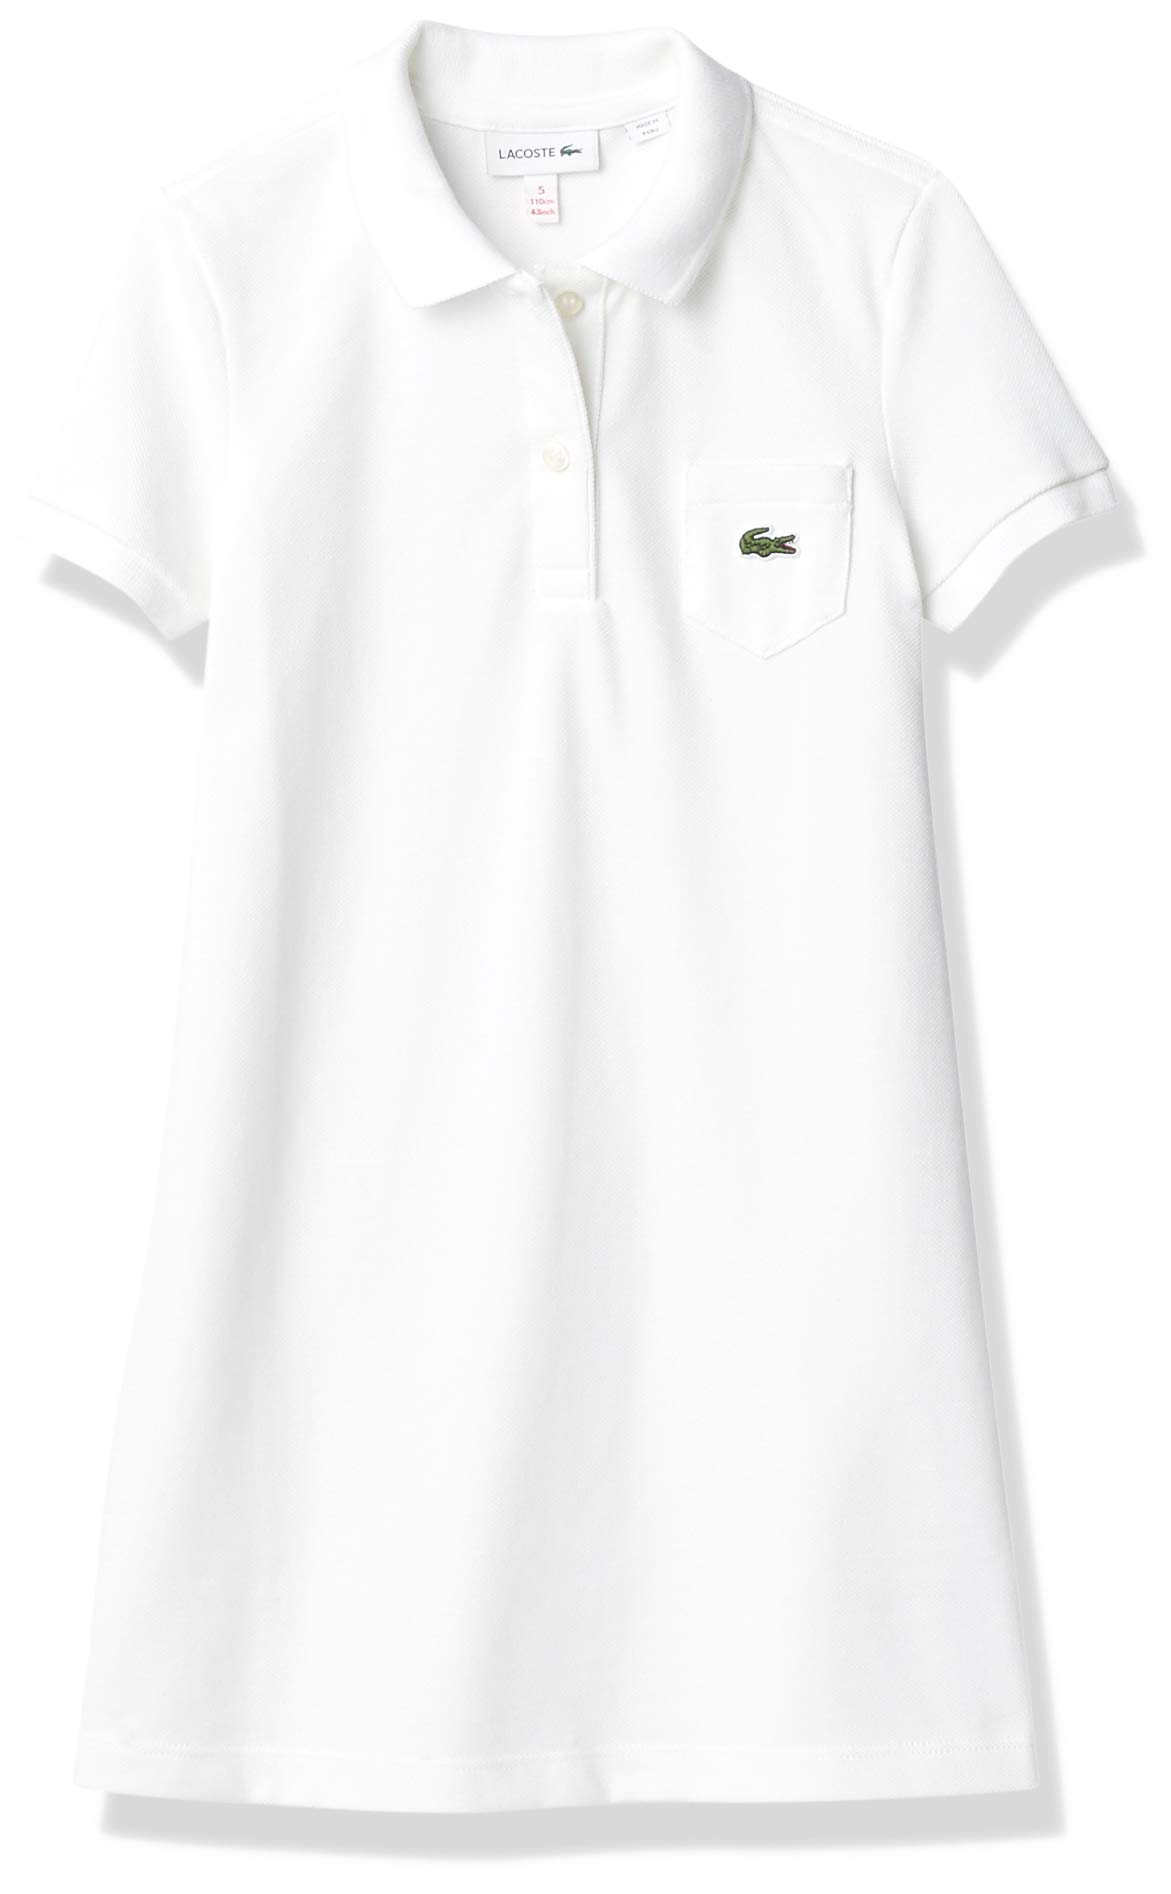 Lacoste Girls' Classic Pique Polo Dress with Pocket